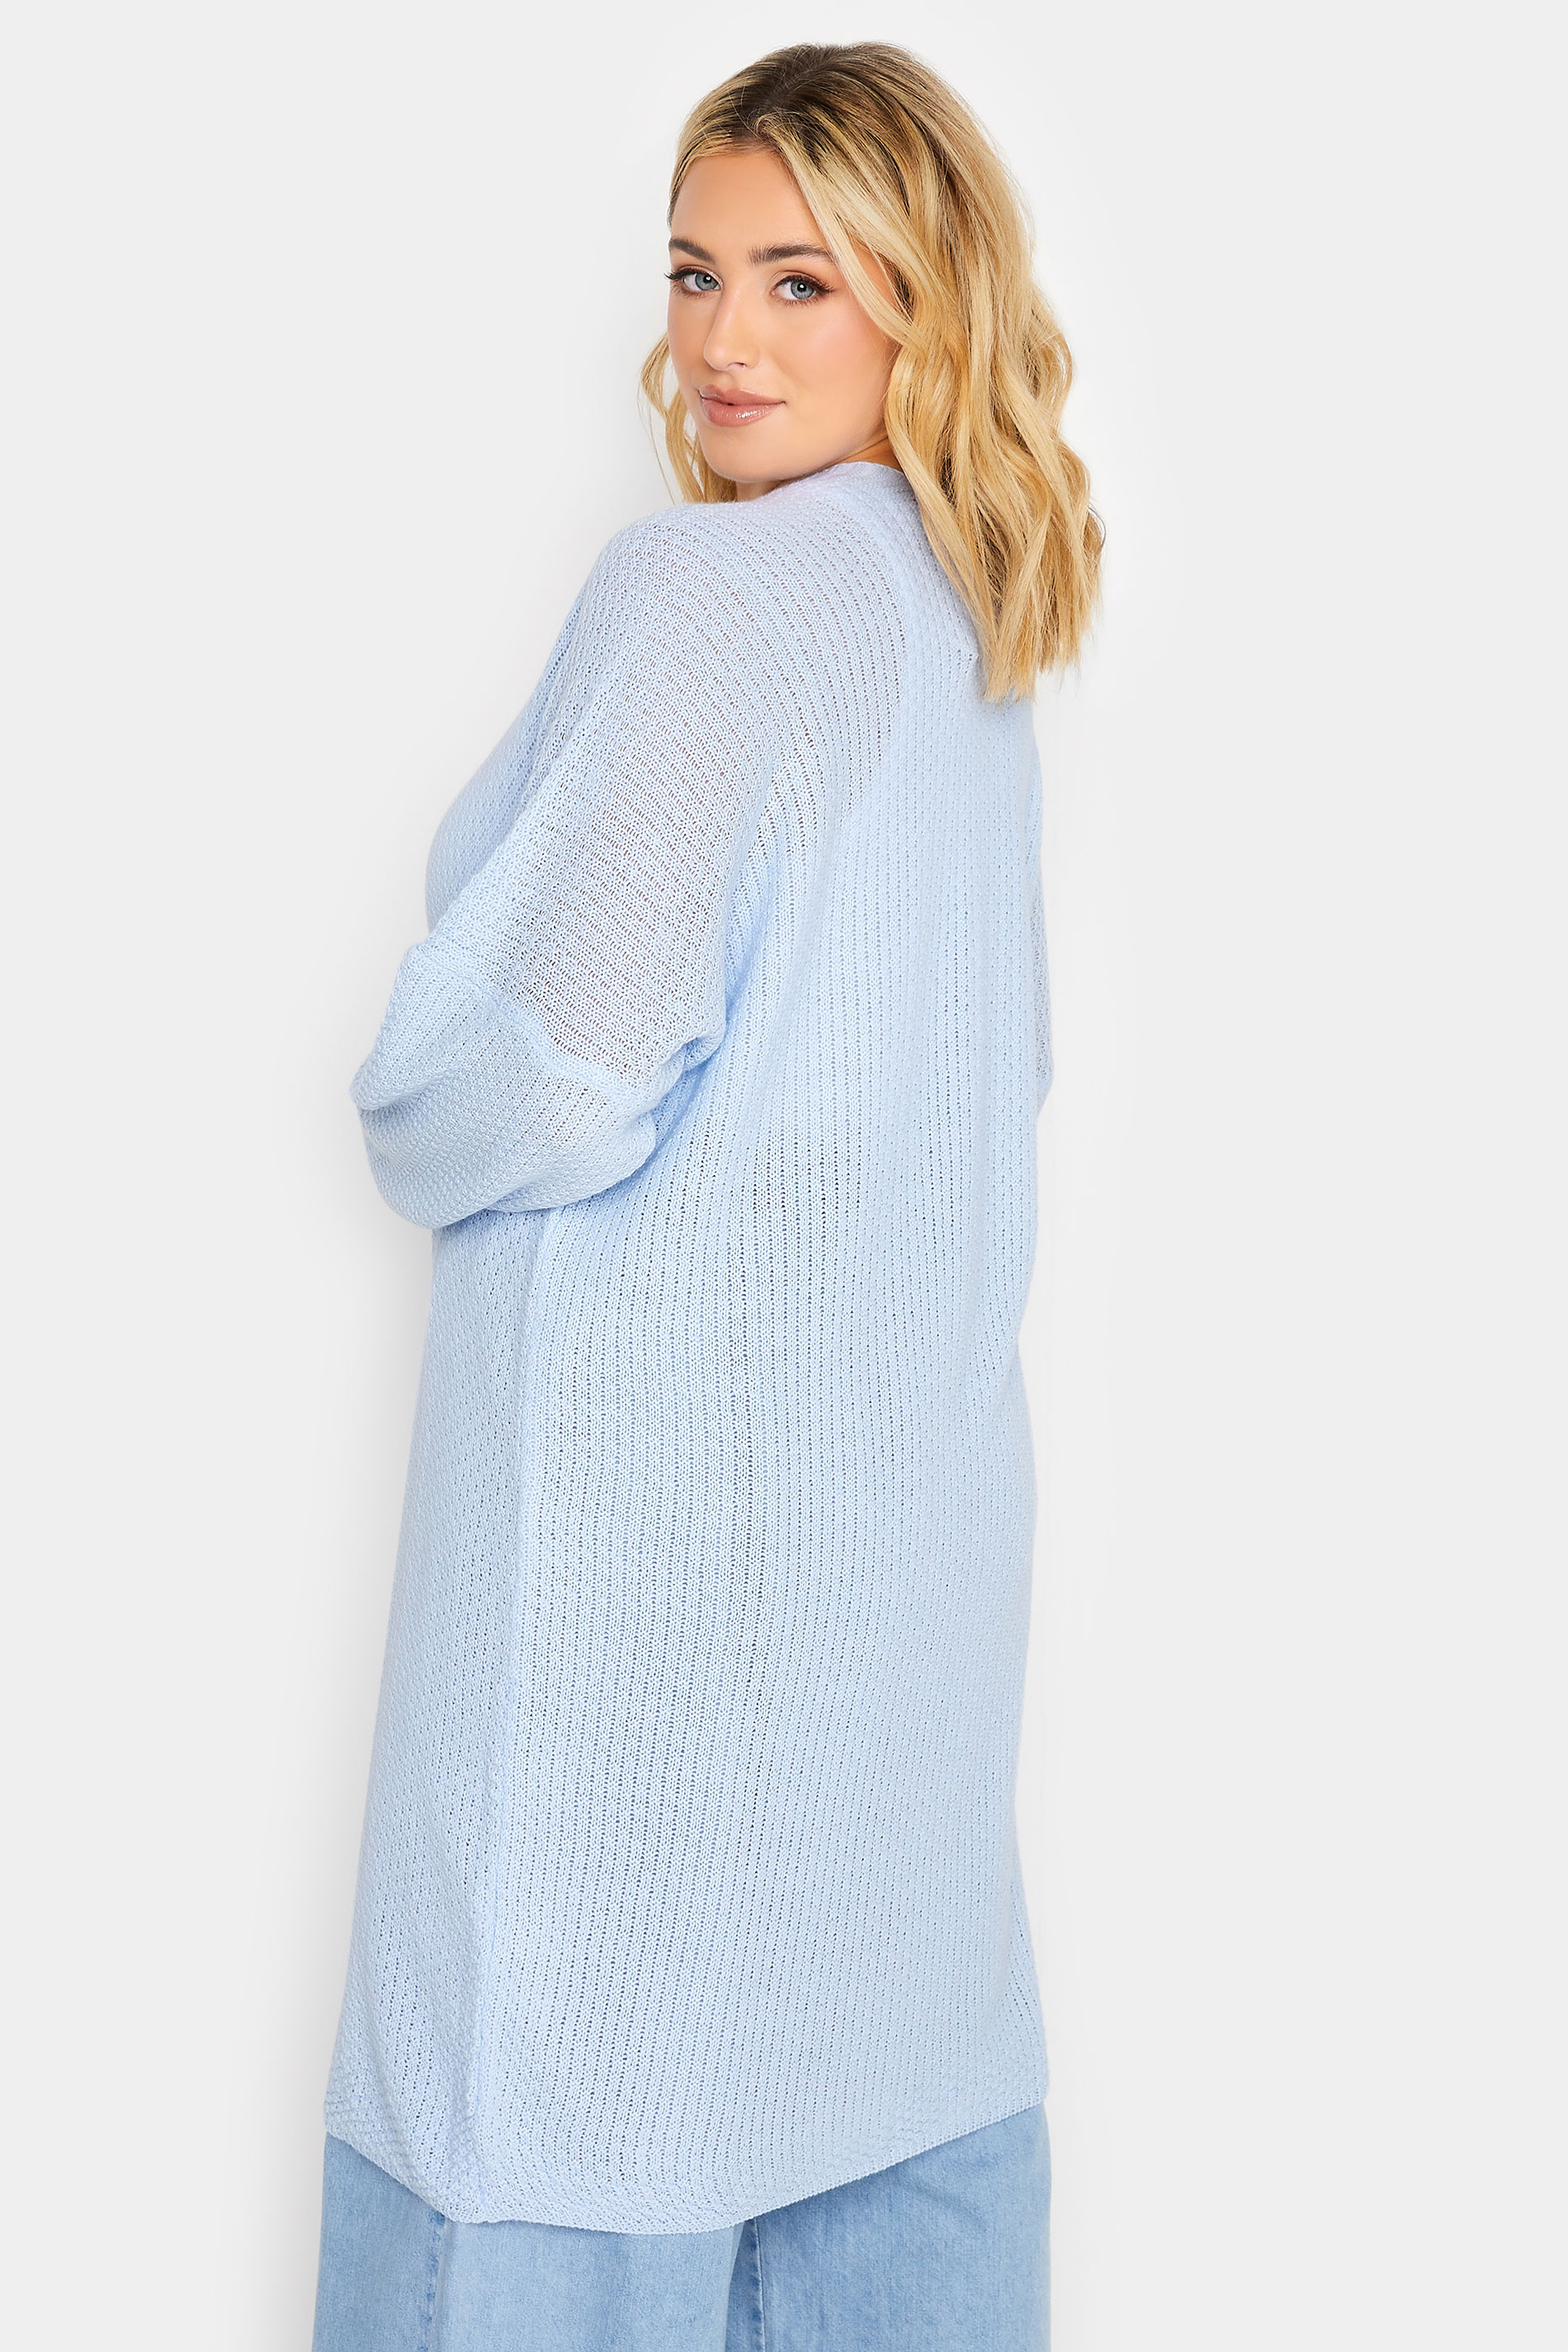 YOURS Curve Plus Size Baby Blue Knitted Long Sleeve Cardigan | Yours Clothing  3